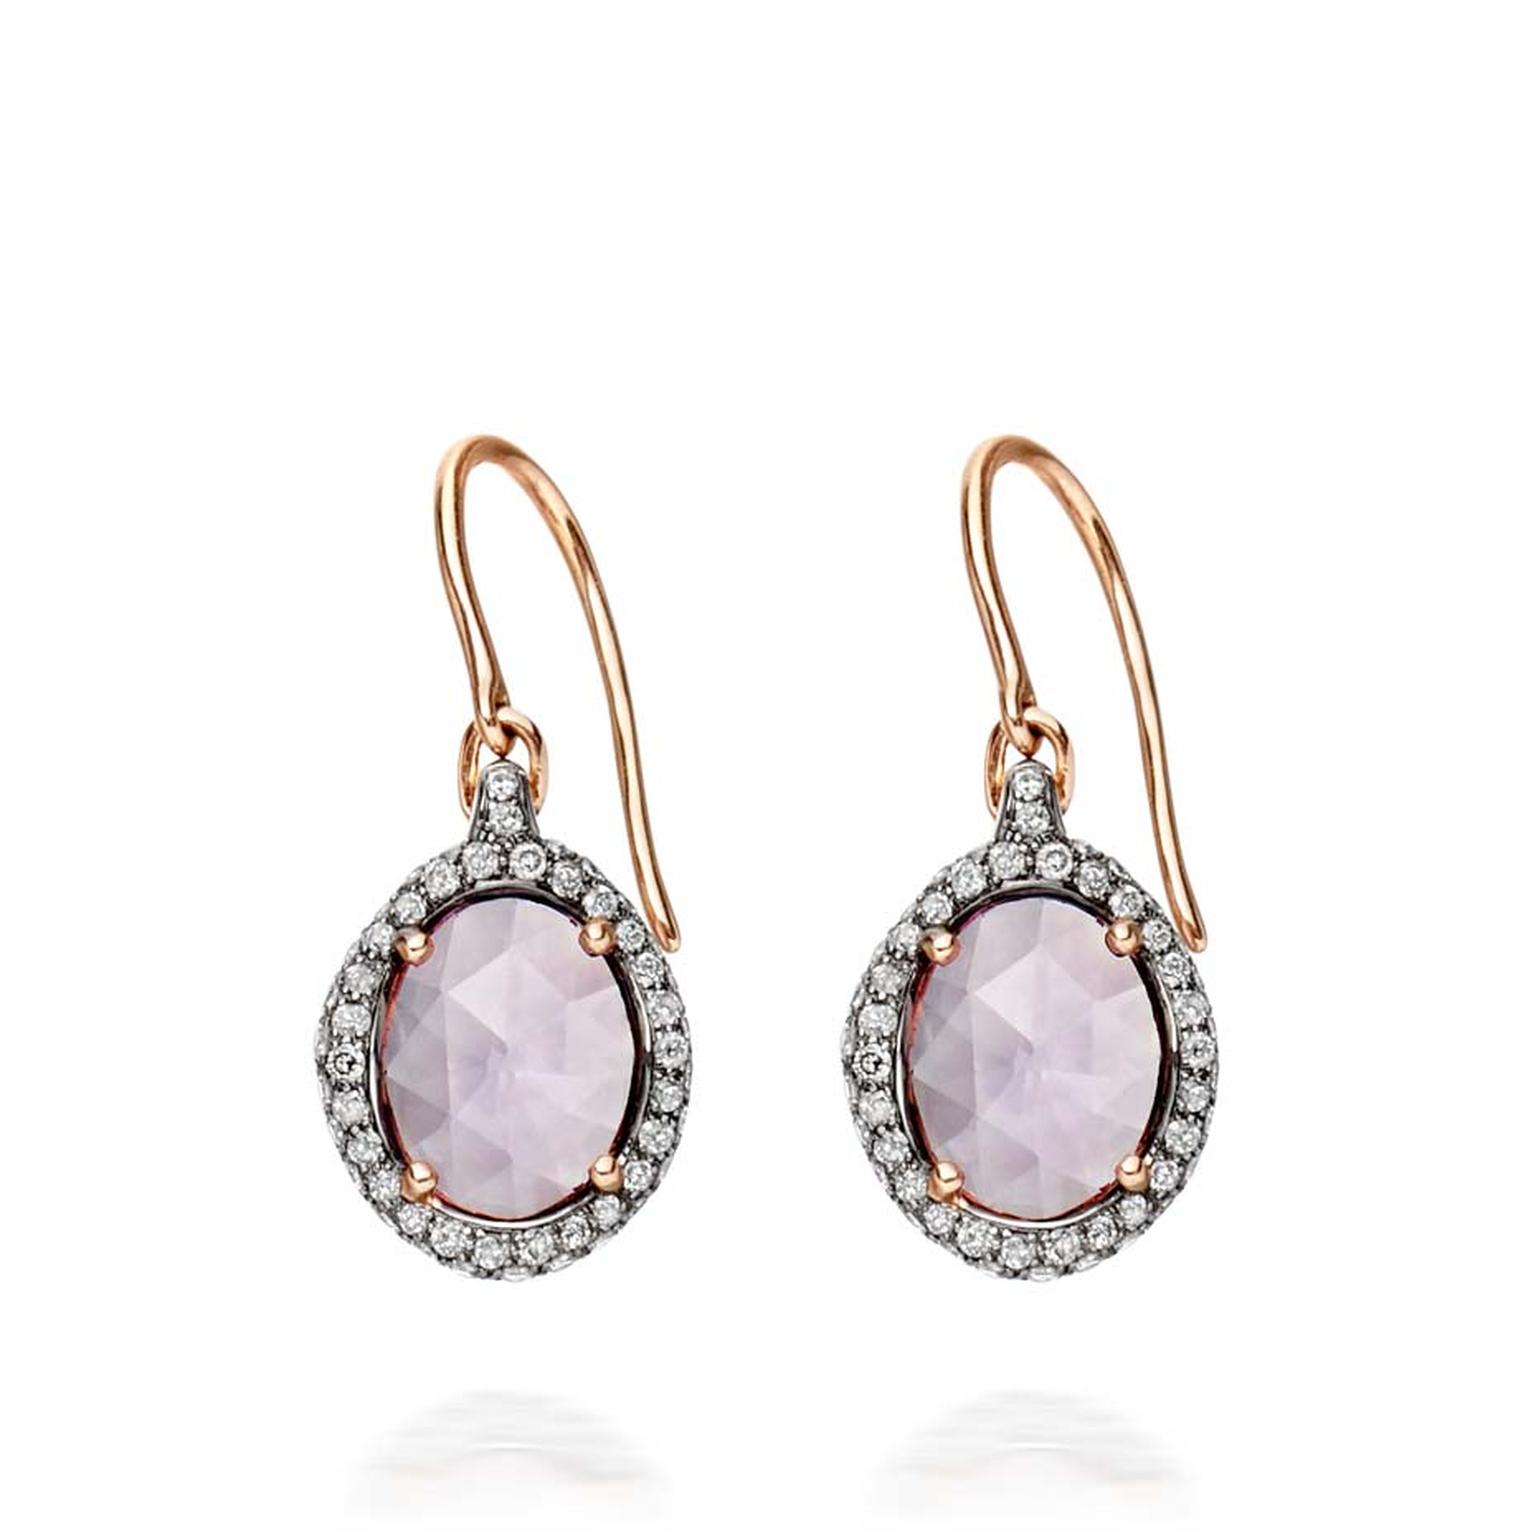 Small oval Fao earrings by Astley Clarke, set with two Rose de France amethysts and pavé diamonds (£1,950).